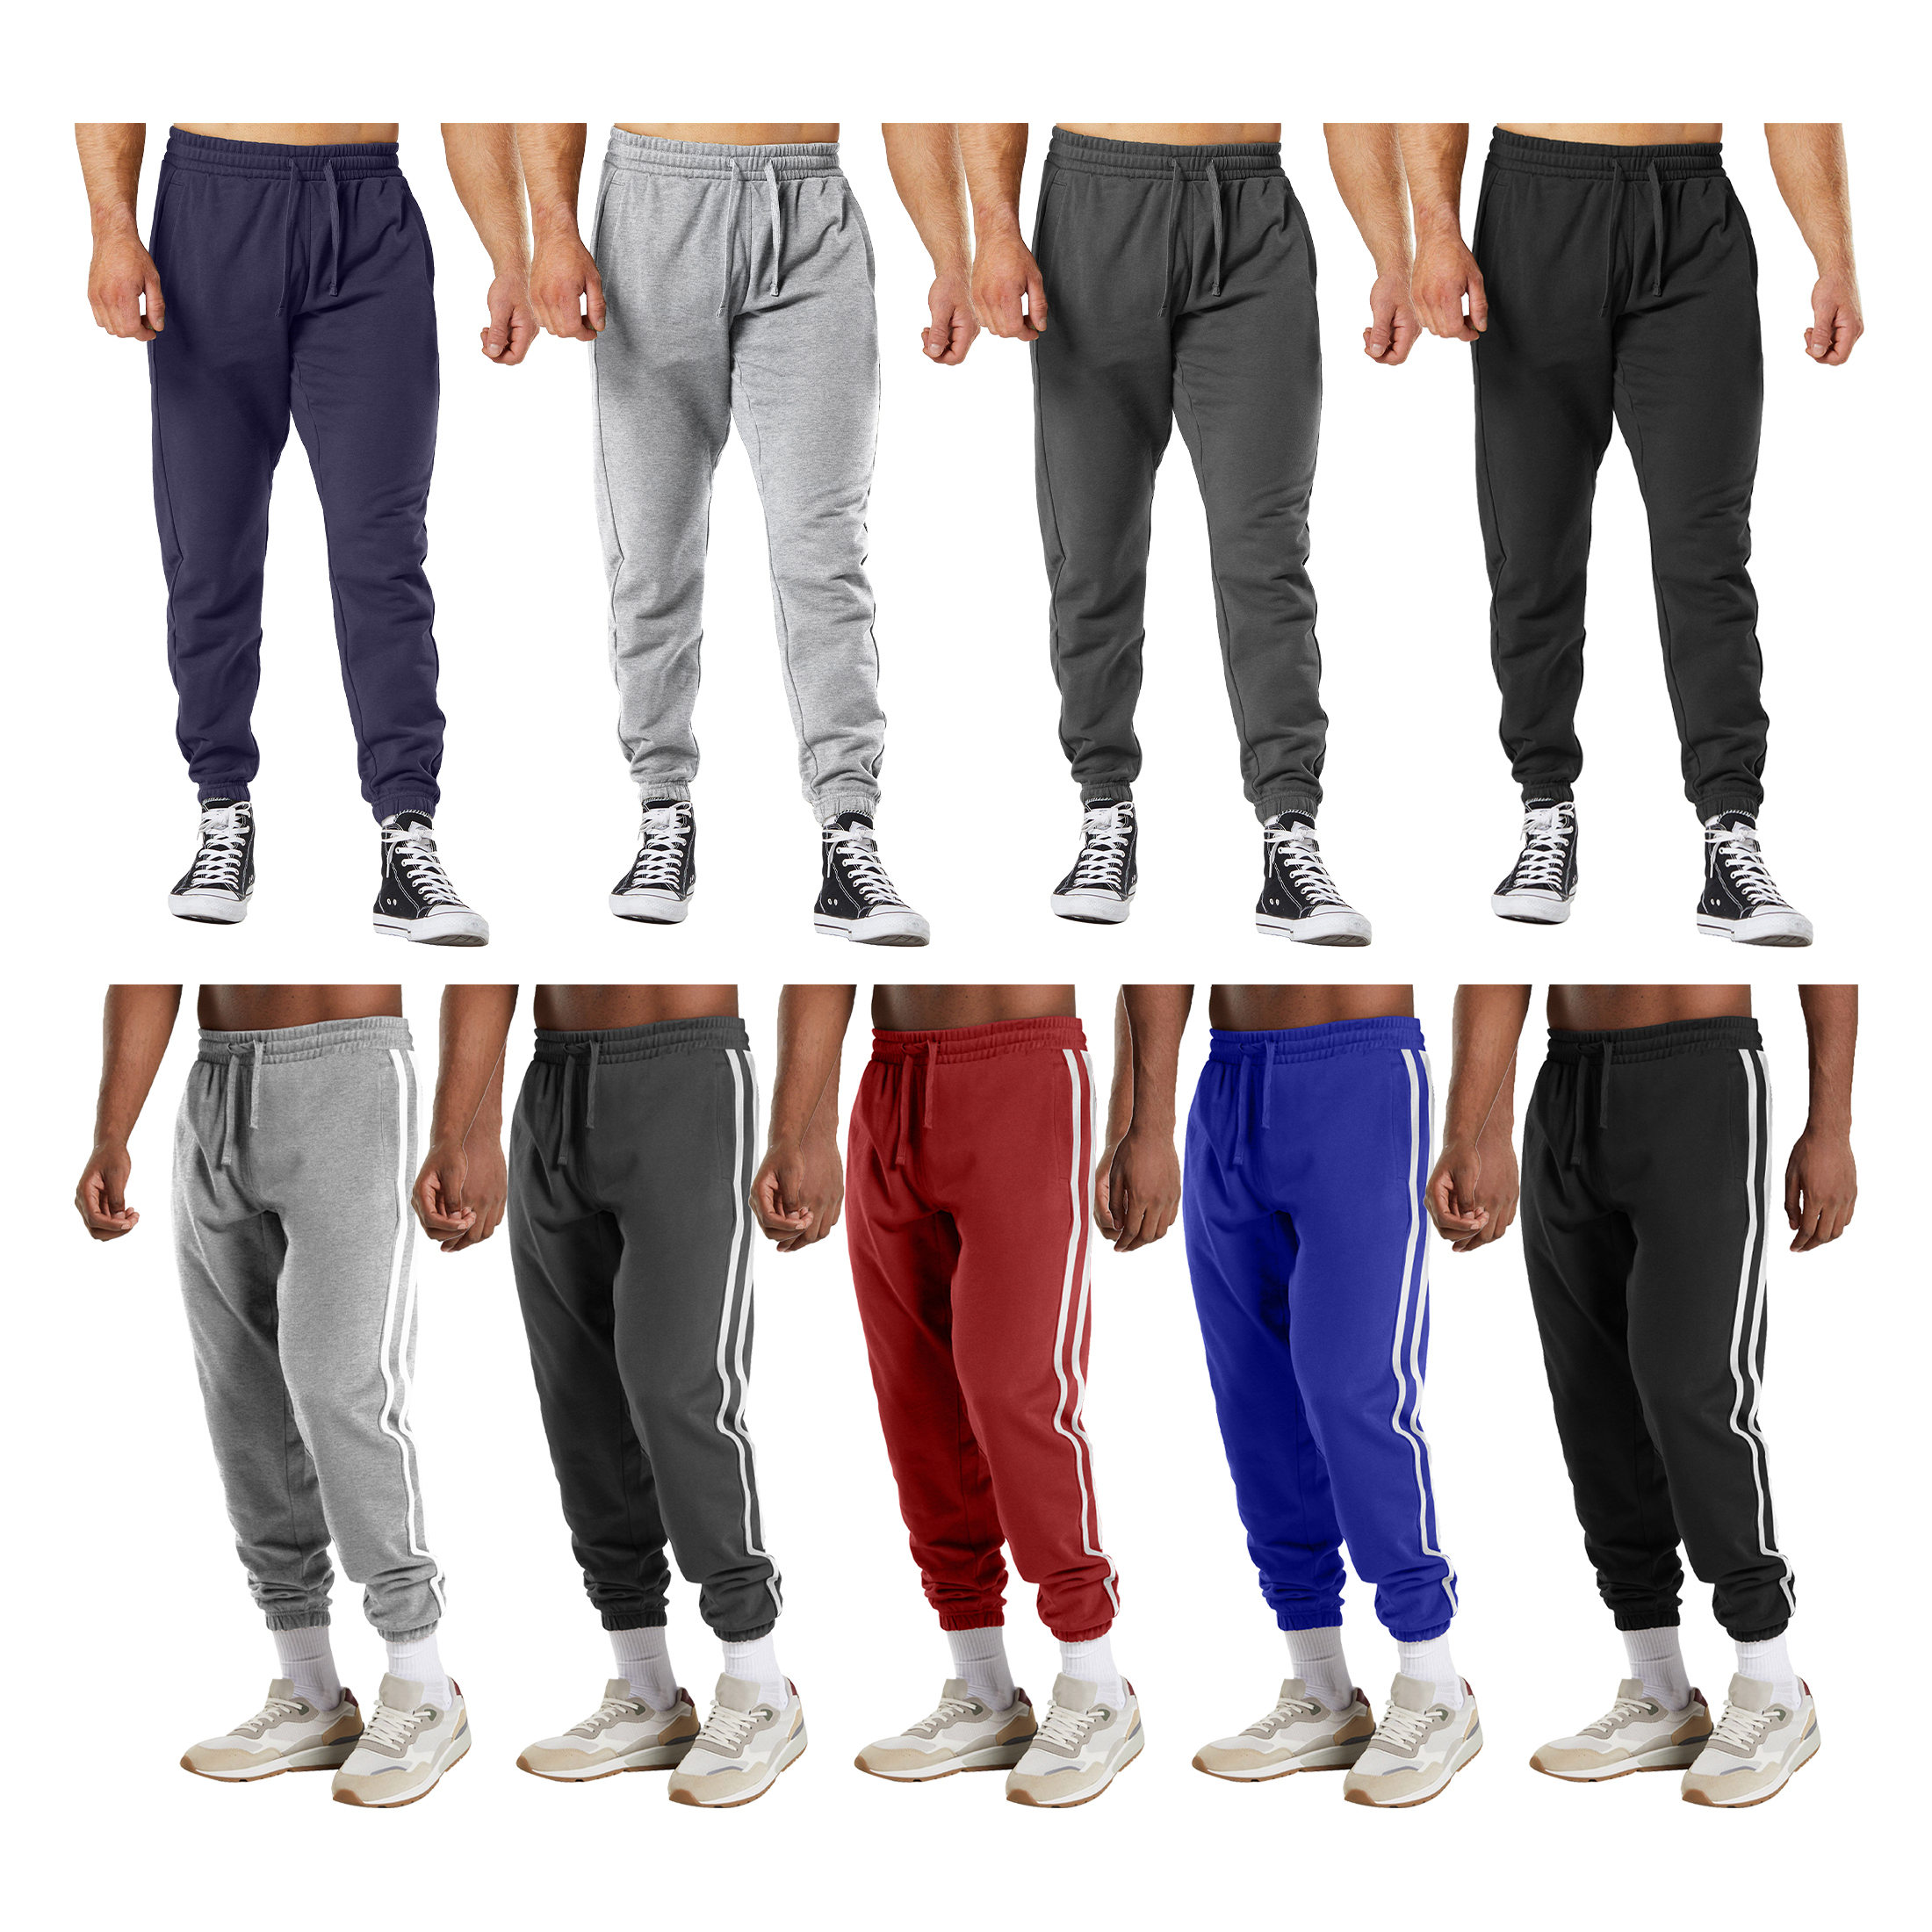 Multi-Pack: Men's Casual Fleece-Lined Elastic Bottom Jogger Pants With Pockets - 2-PACK, S